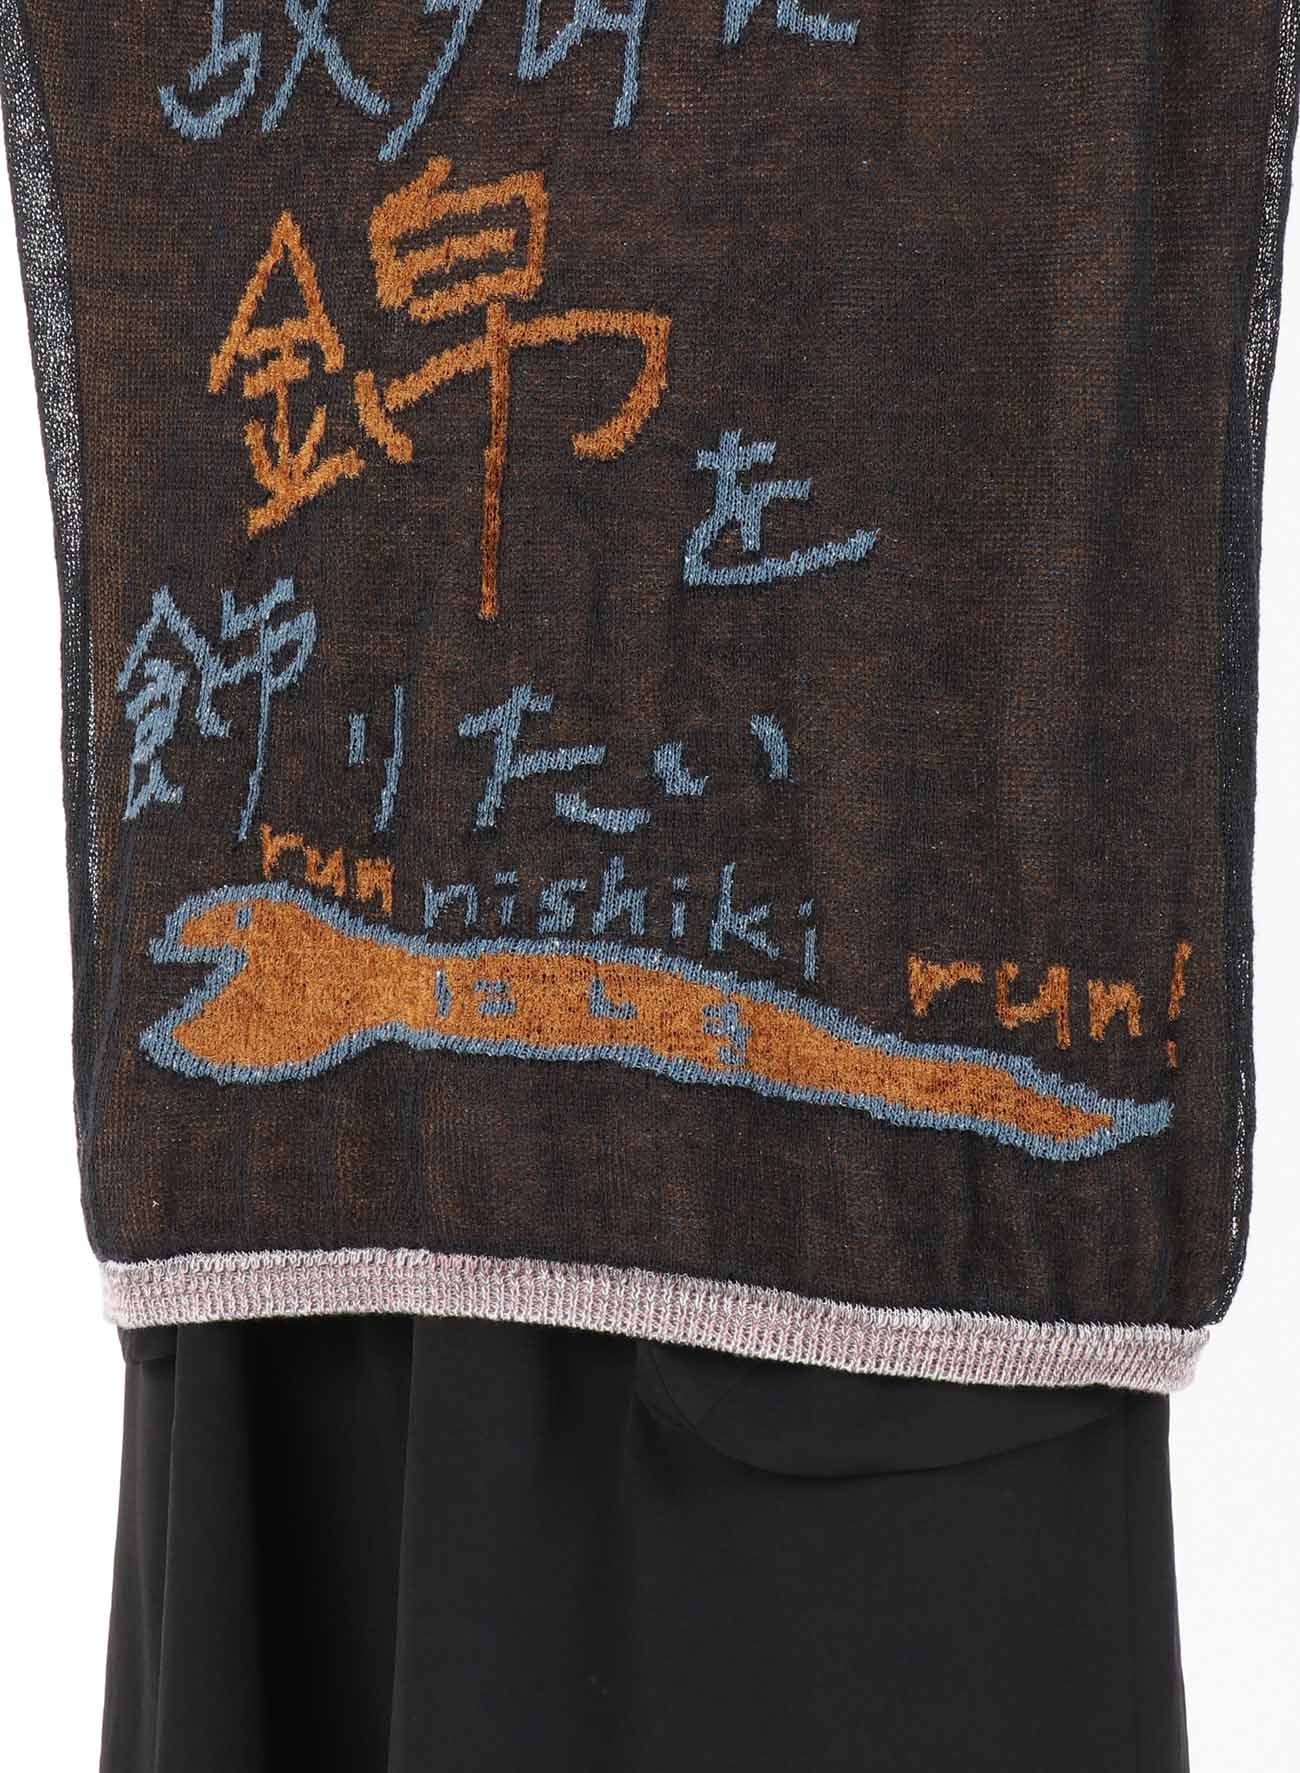 7G MESSAGE JACQUARD PRIZE HOME TOWN LONG SLEEVES